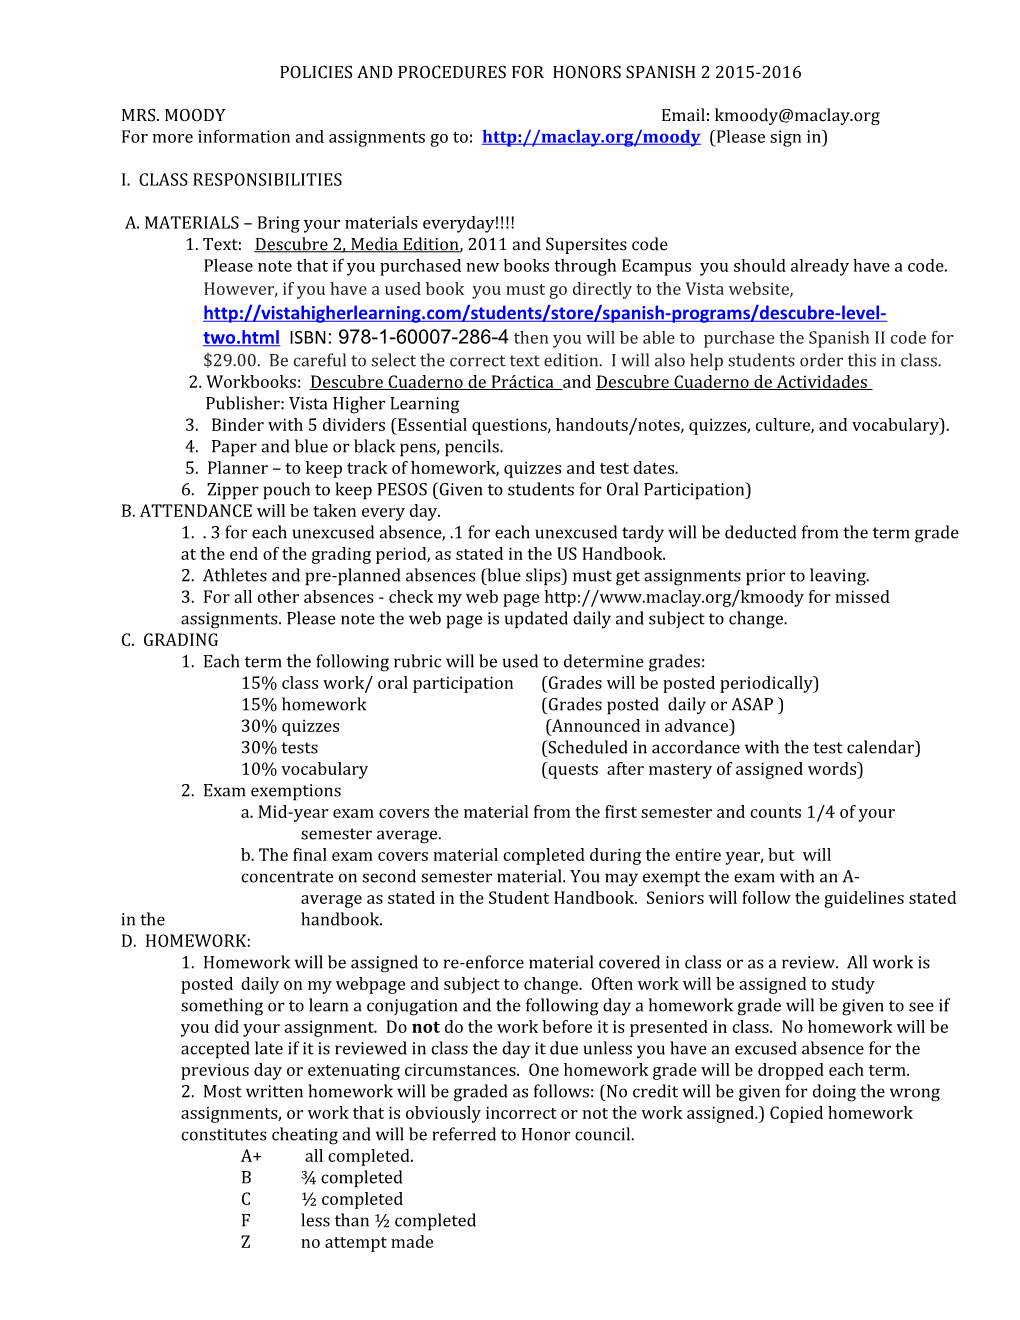 Policies and Procedures for Honors Spanish 22015-2016